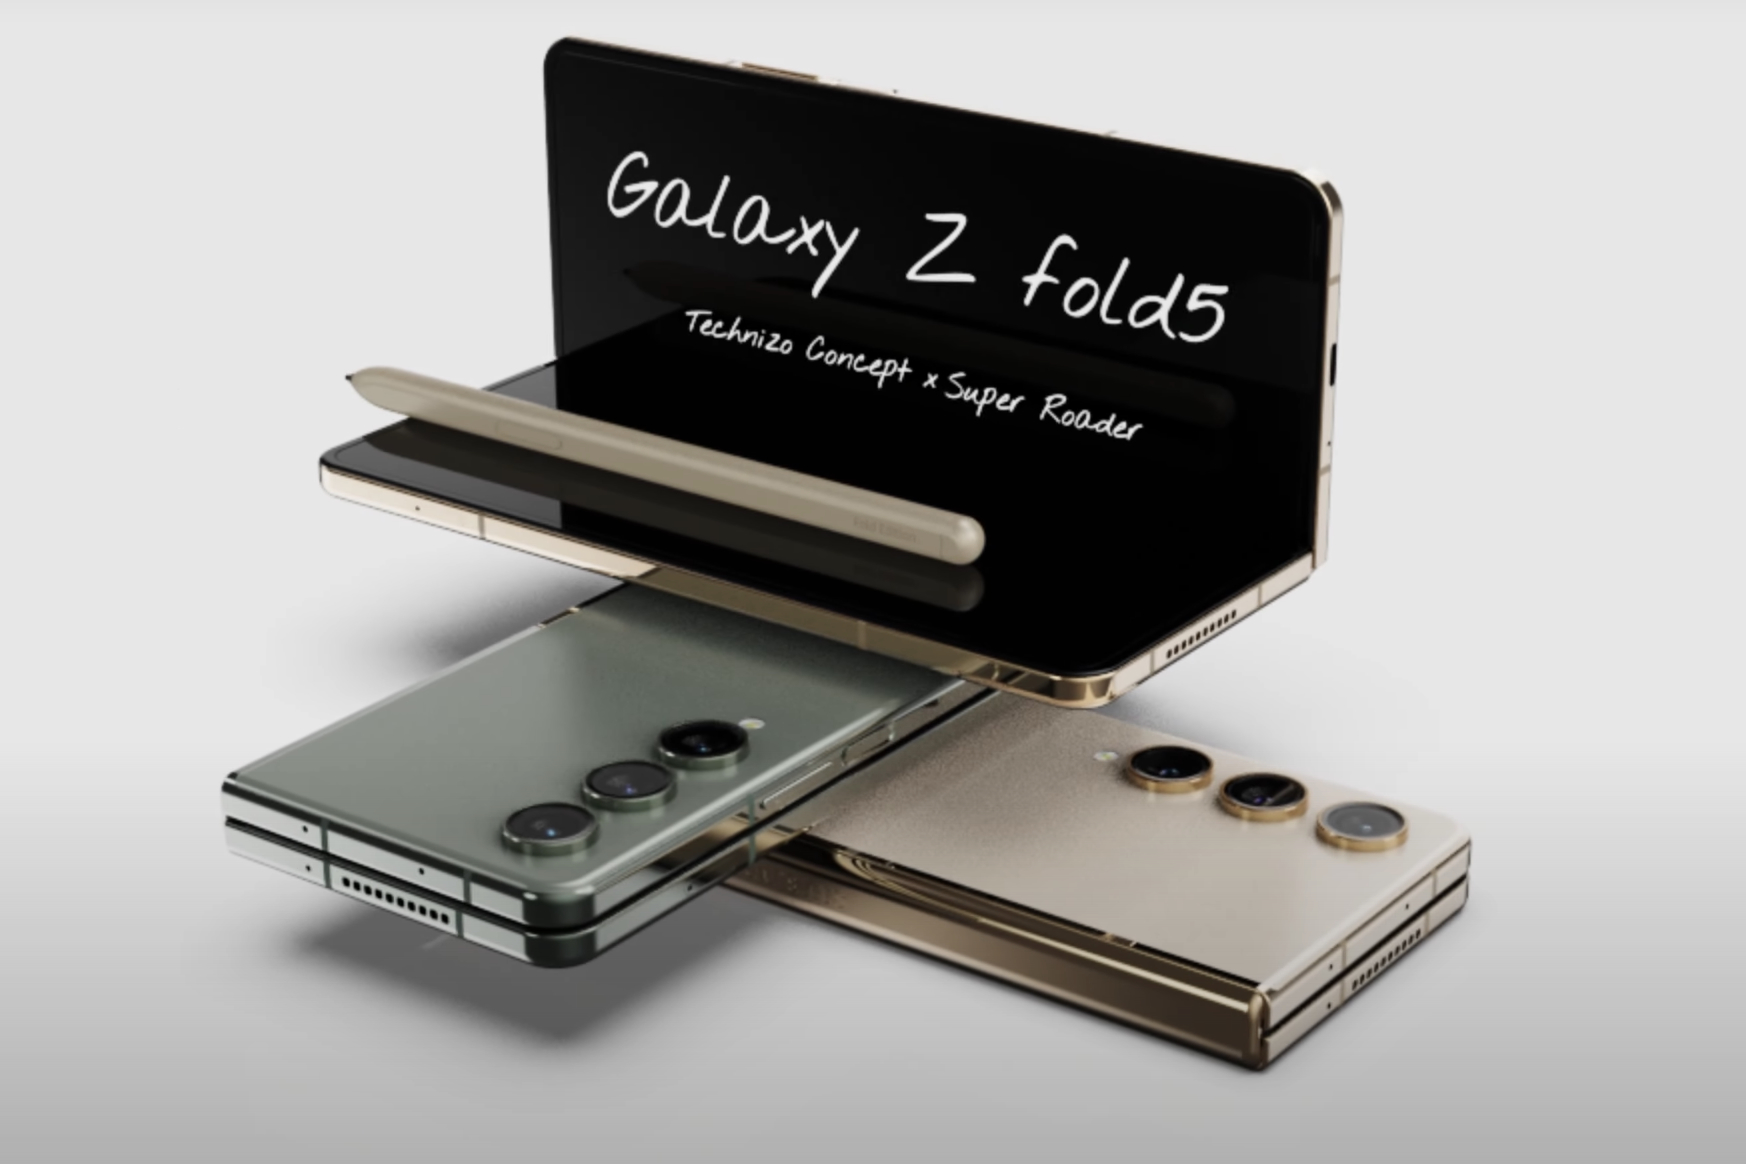 Concept render of the Samsung Galaxy Z Fold 5.